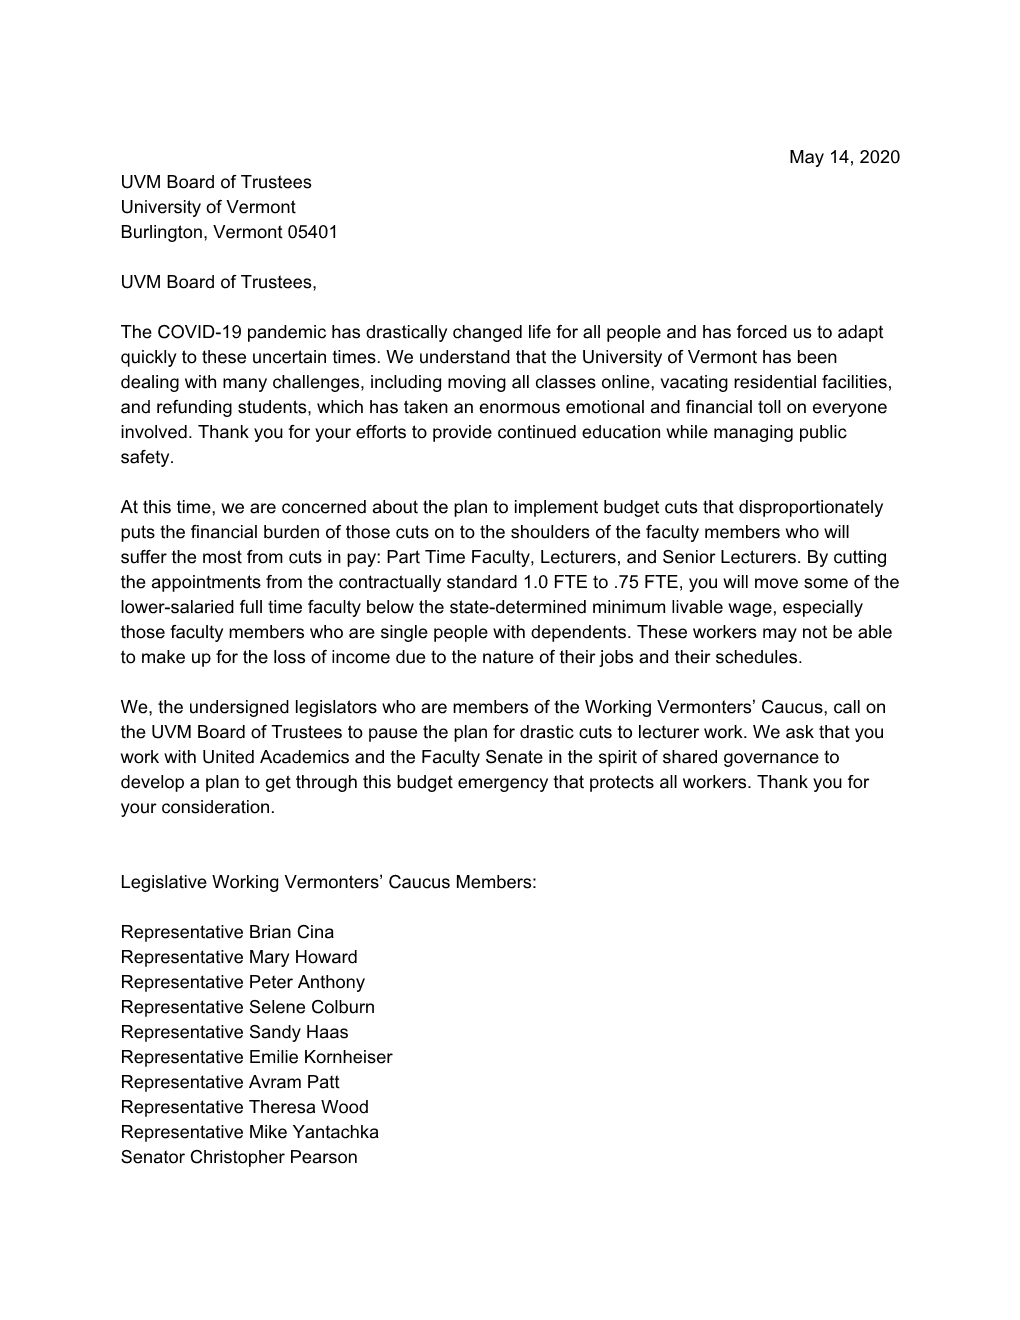 May 2020 Letter from Working Vermont